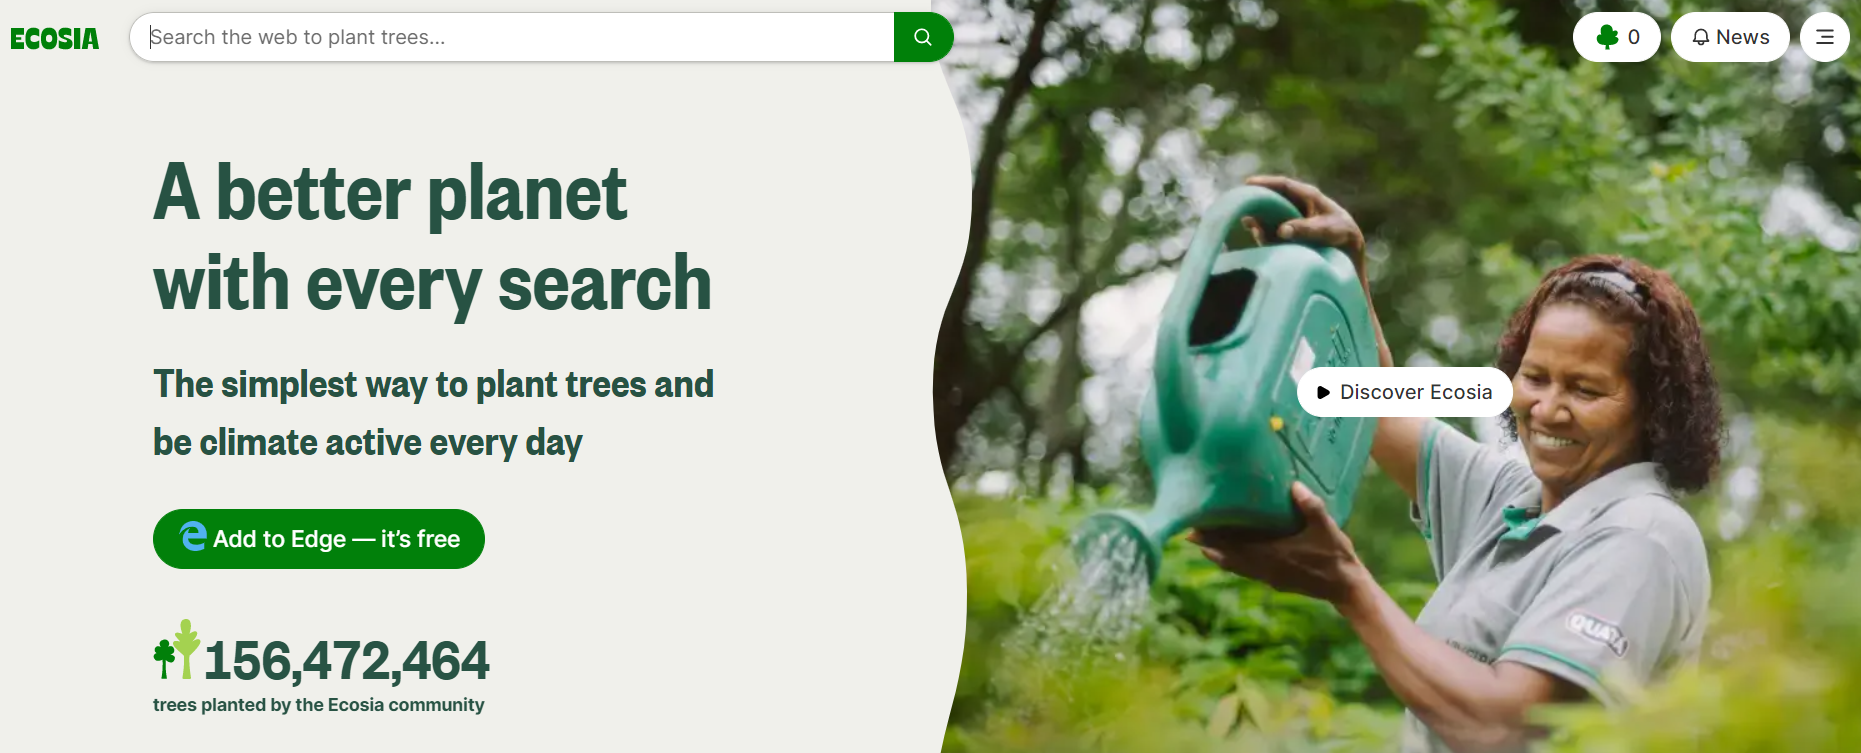 The Ecosia search engine’s home page